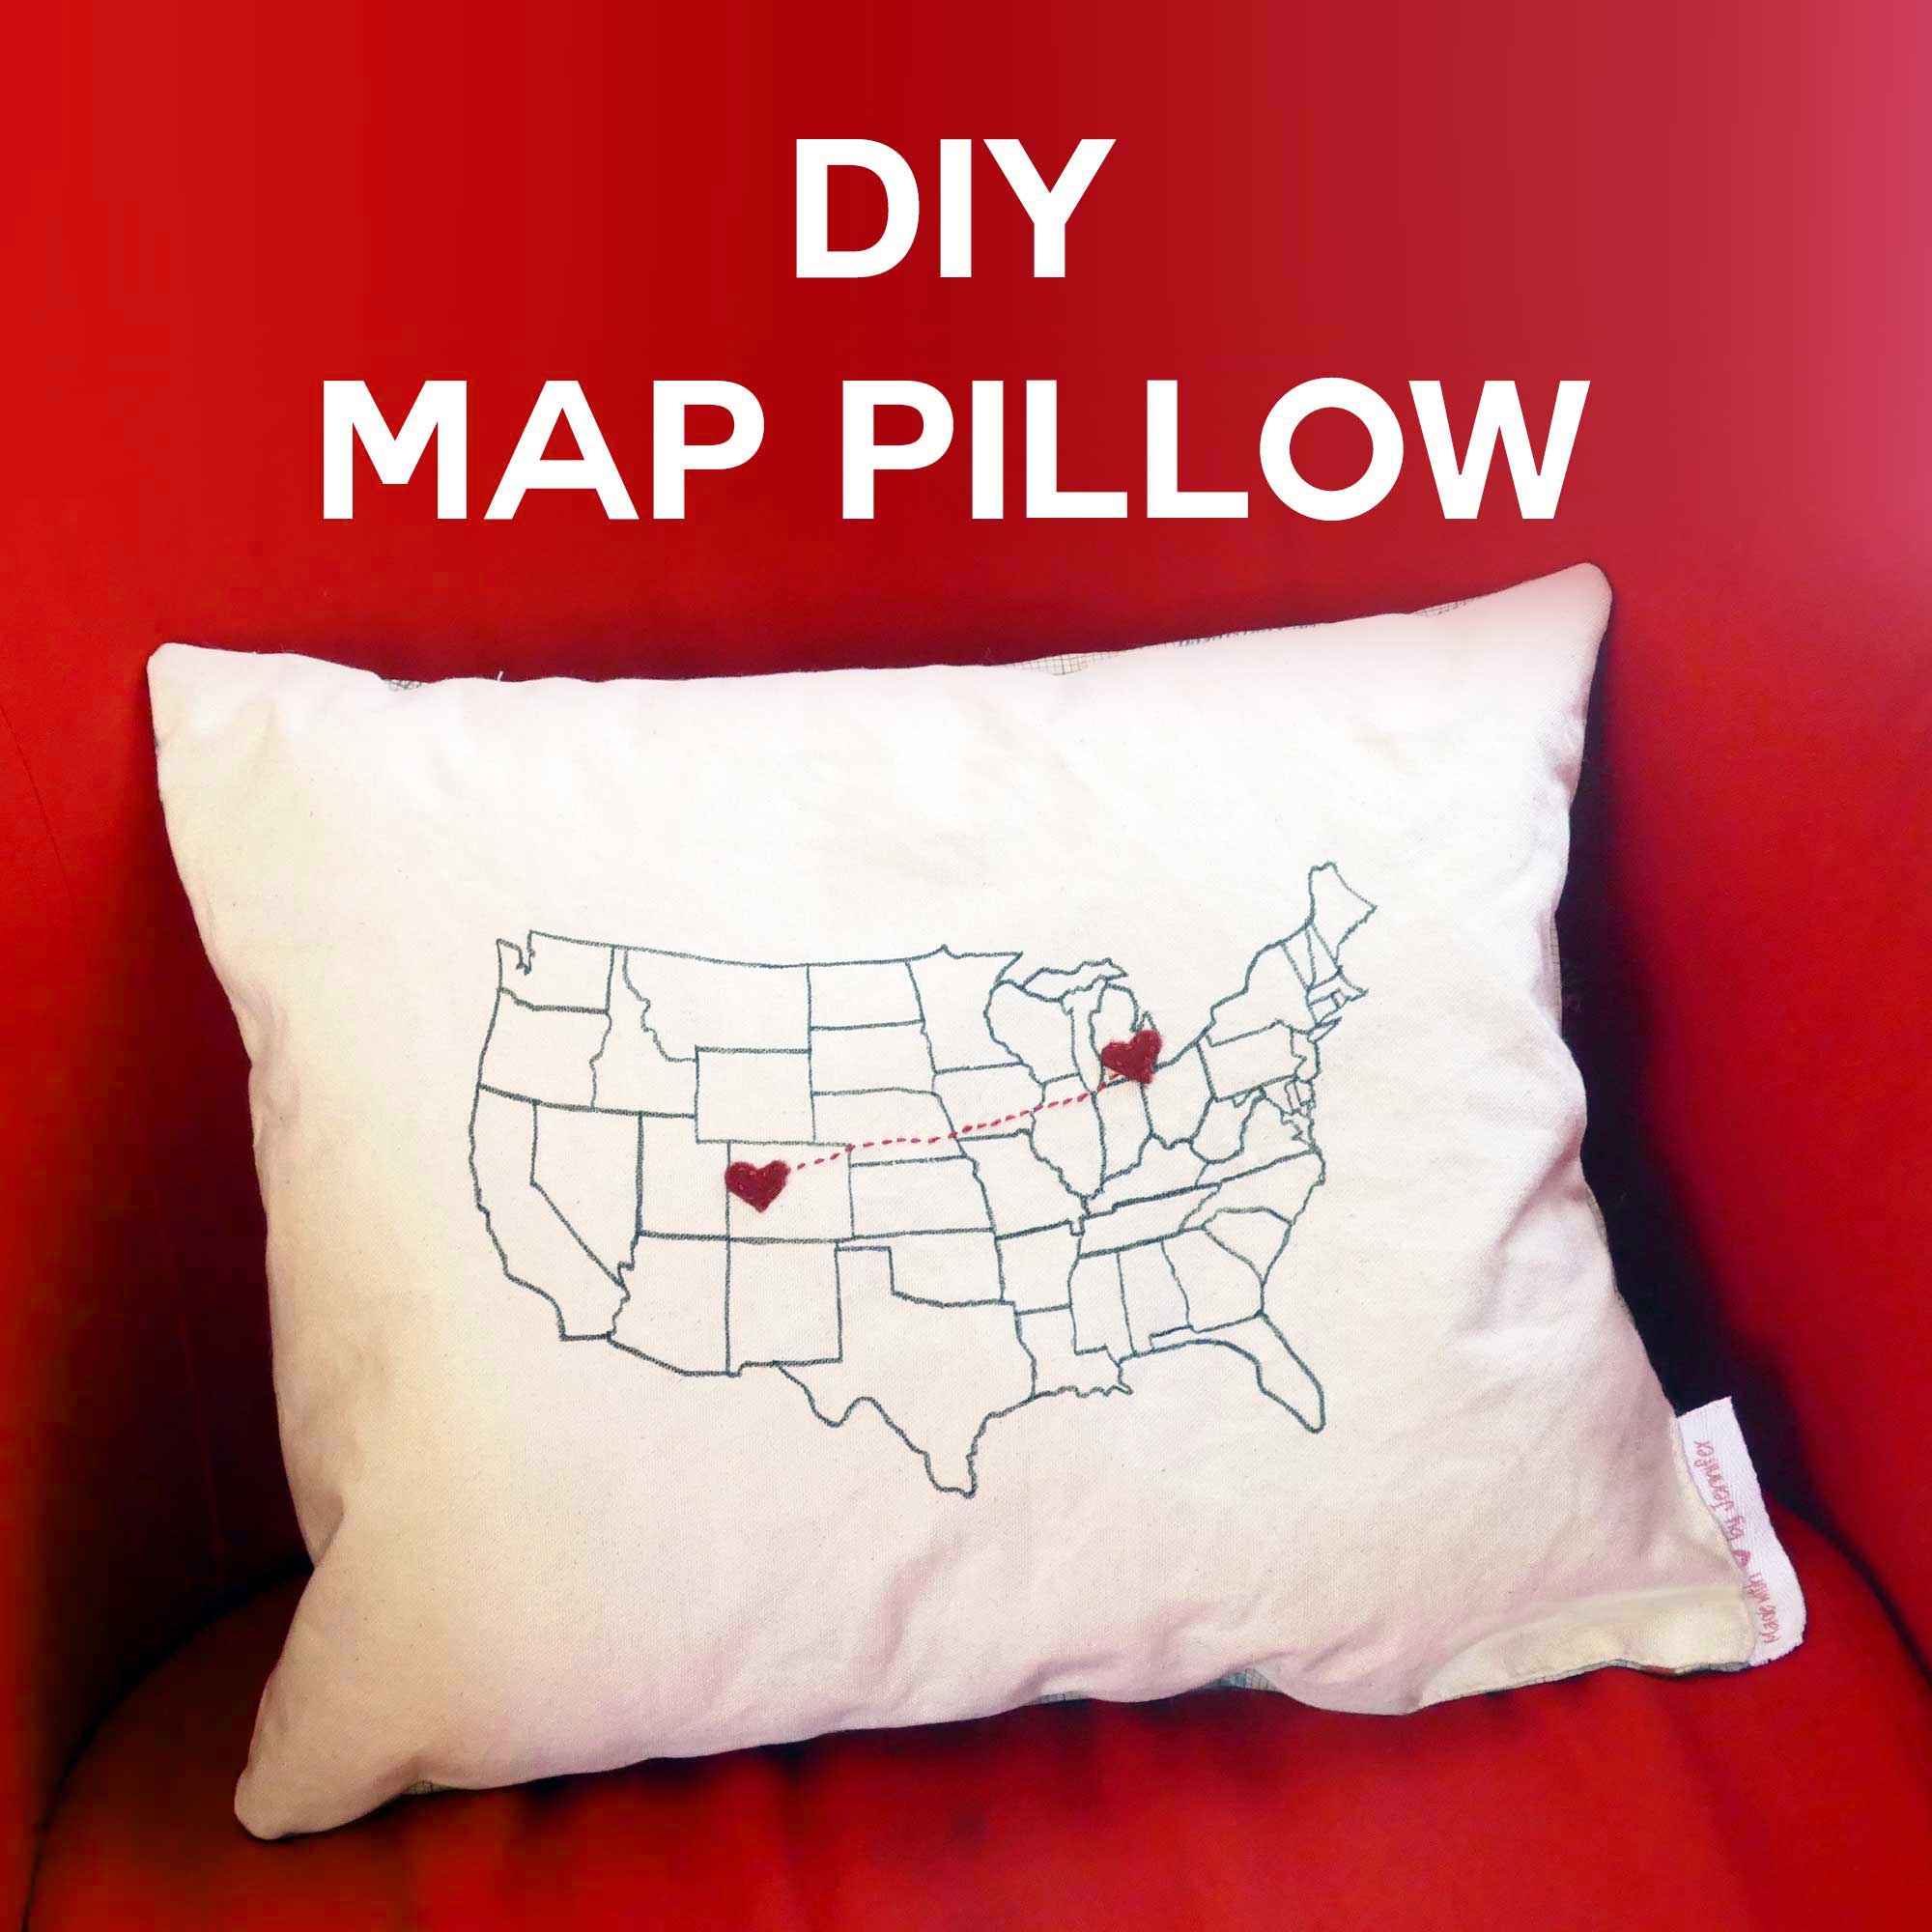 DIY Home Decor: DIY Map Pillow | State to State Hearts | #diy #homedecor